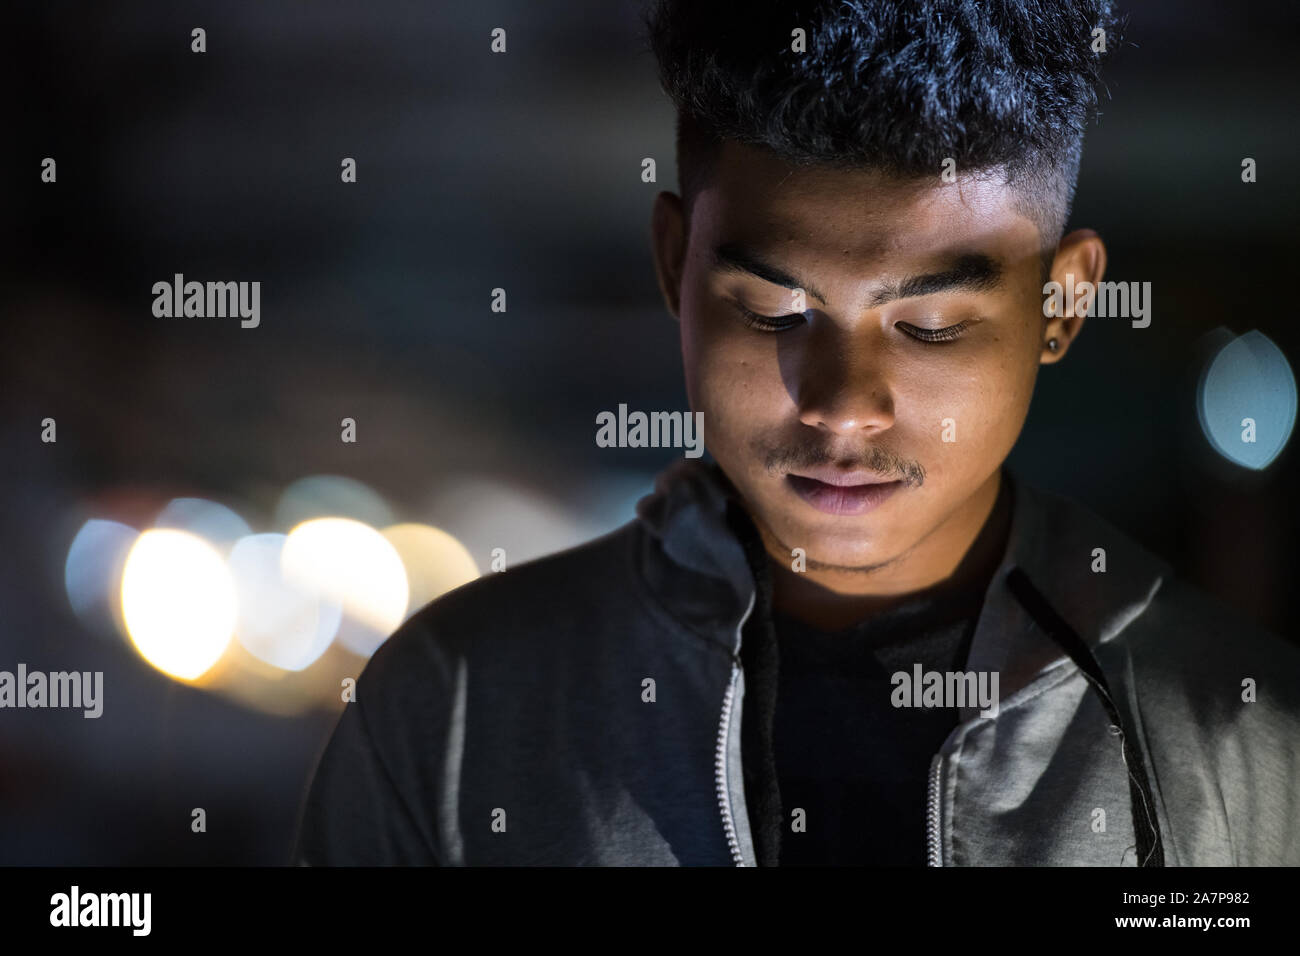 Face of young Asian man using phone in the city streets at night Stock Photo